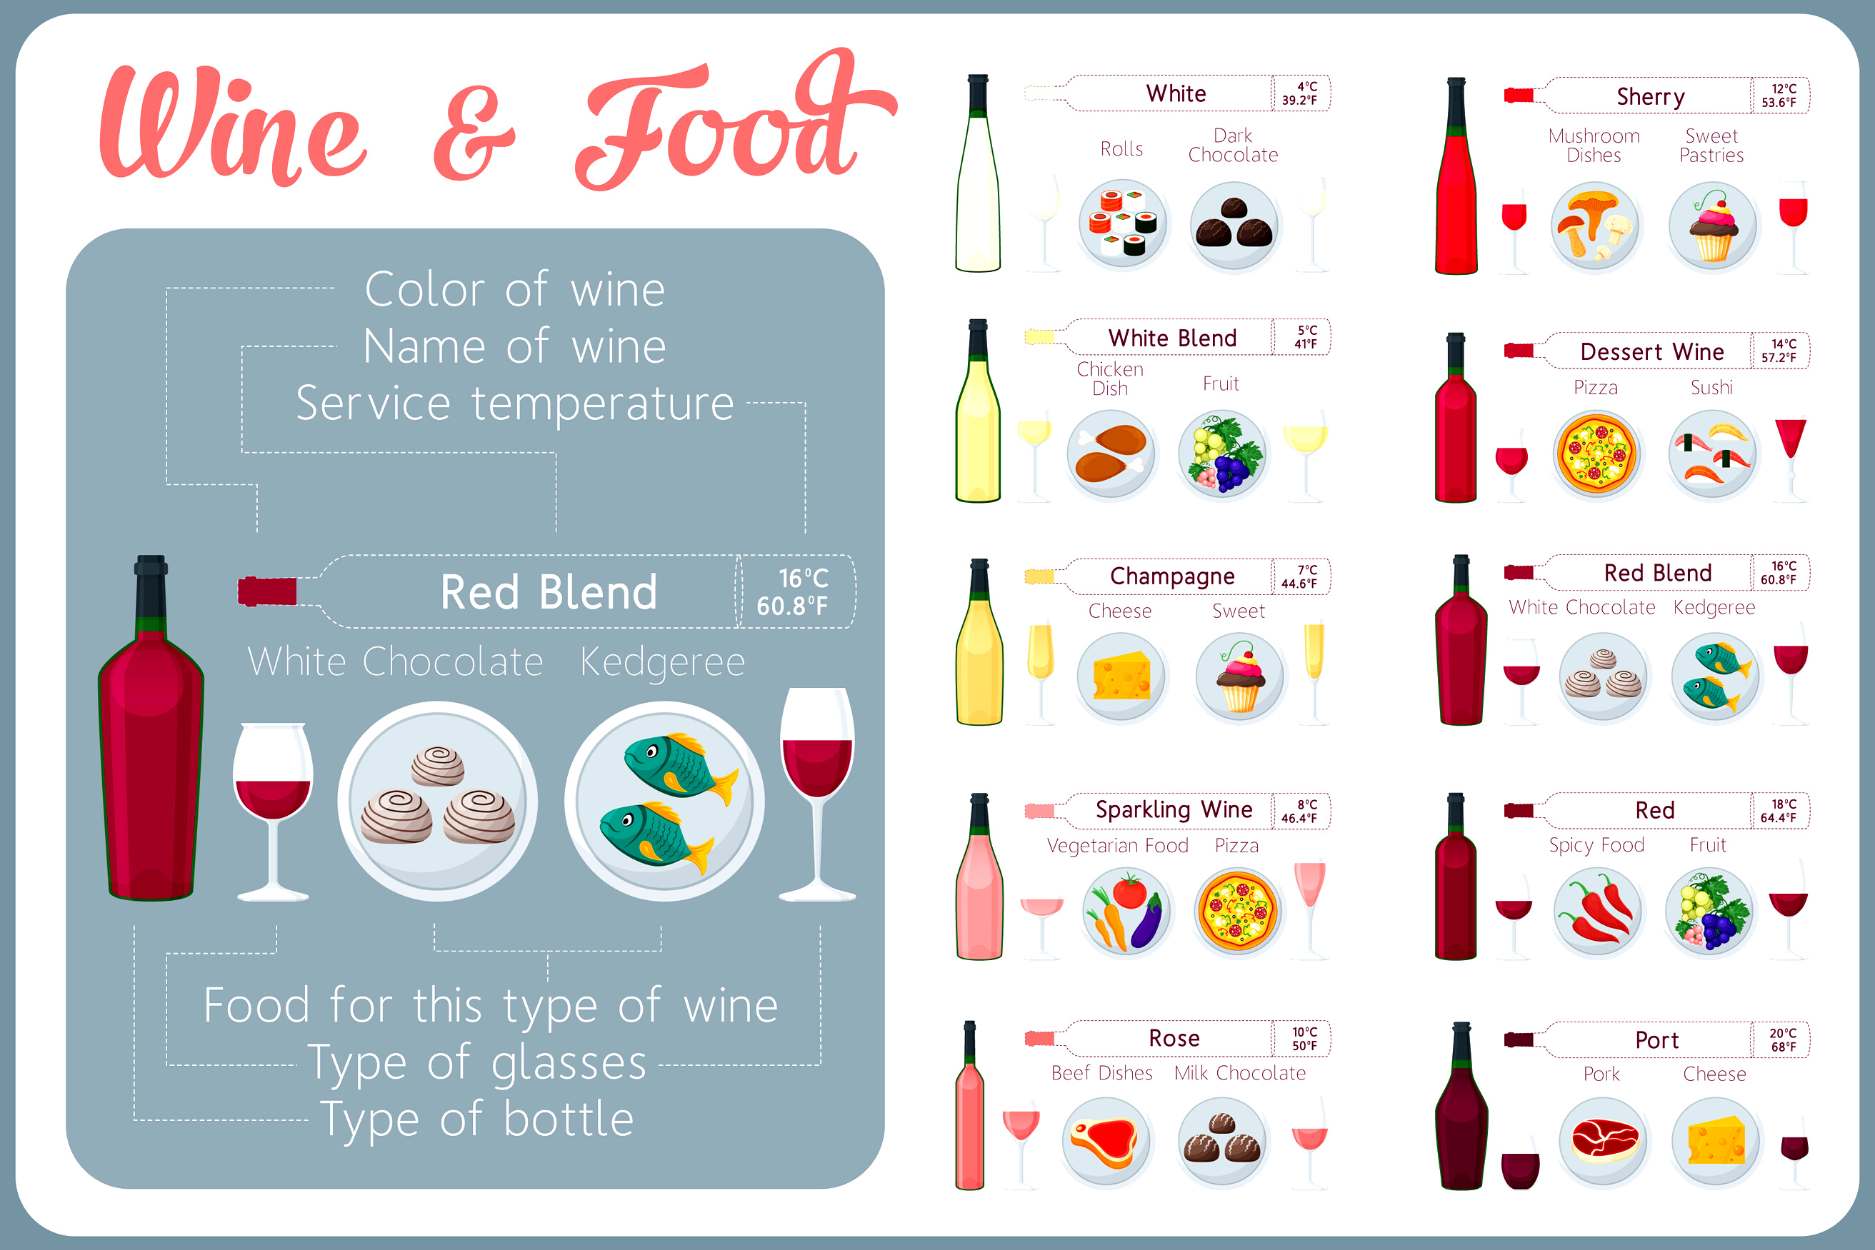 showing chart of wine and food pairing